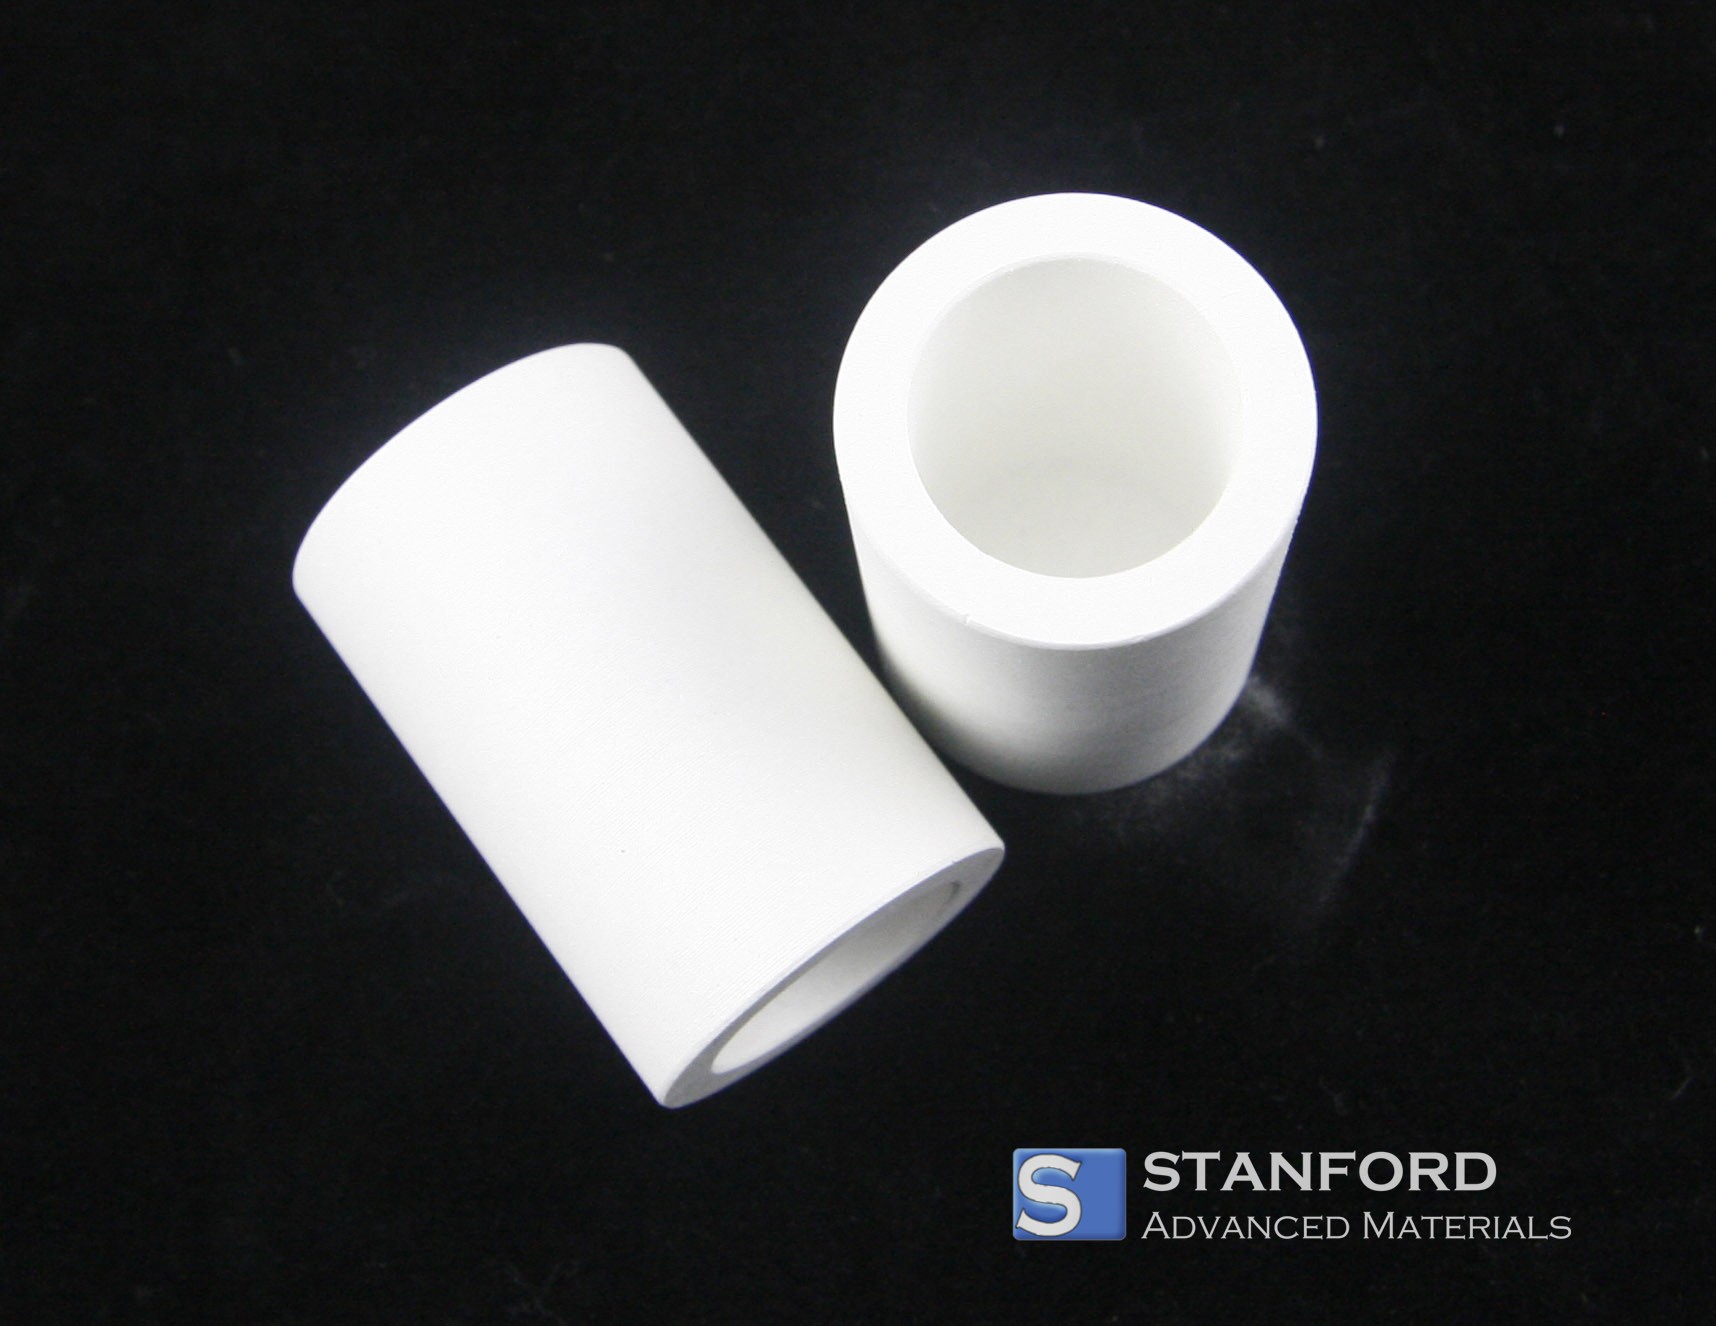 MSE PRO High Purity Boron Nitride (BN) Crucible with Lid